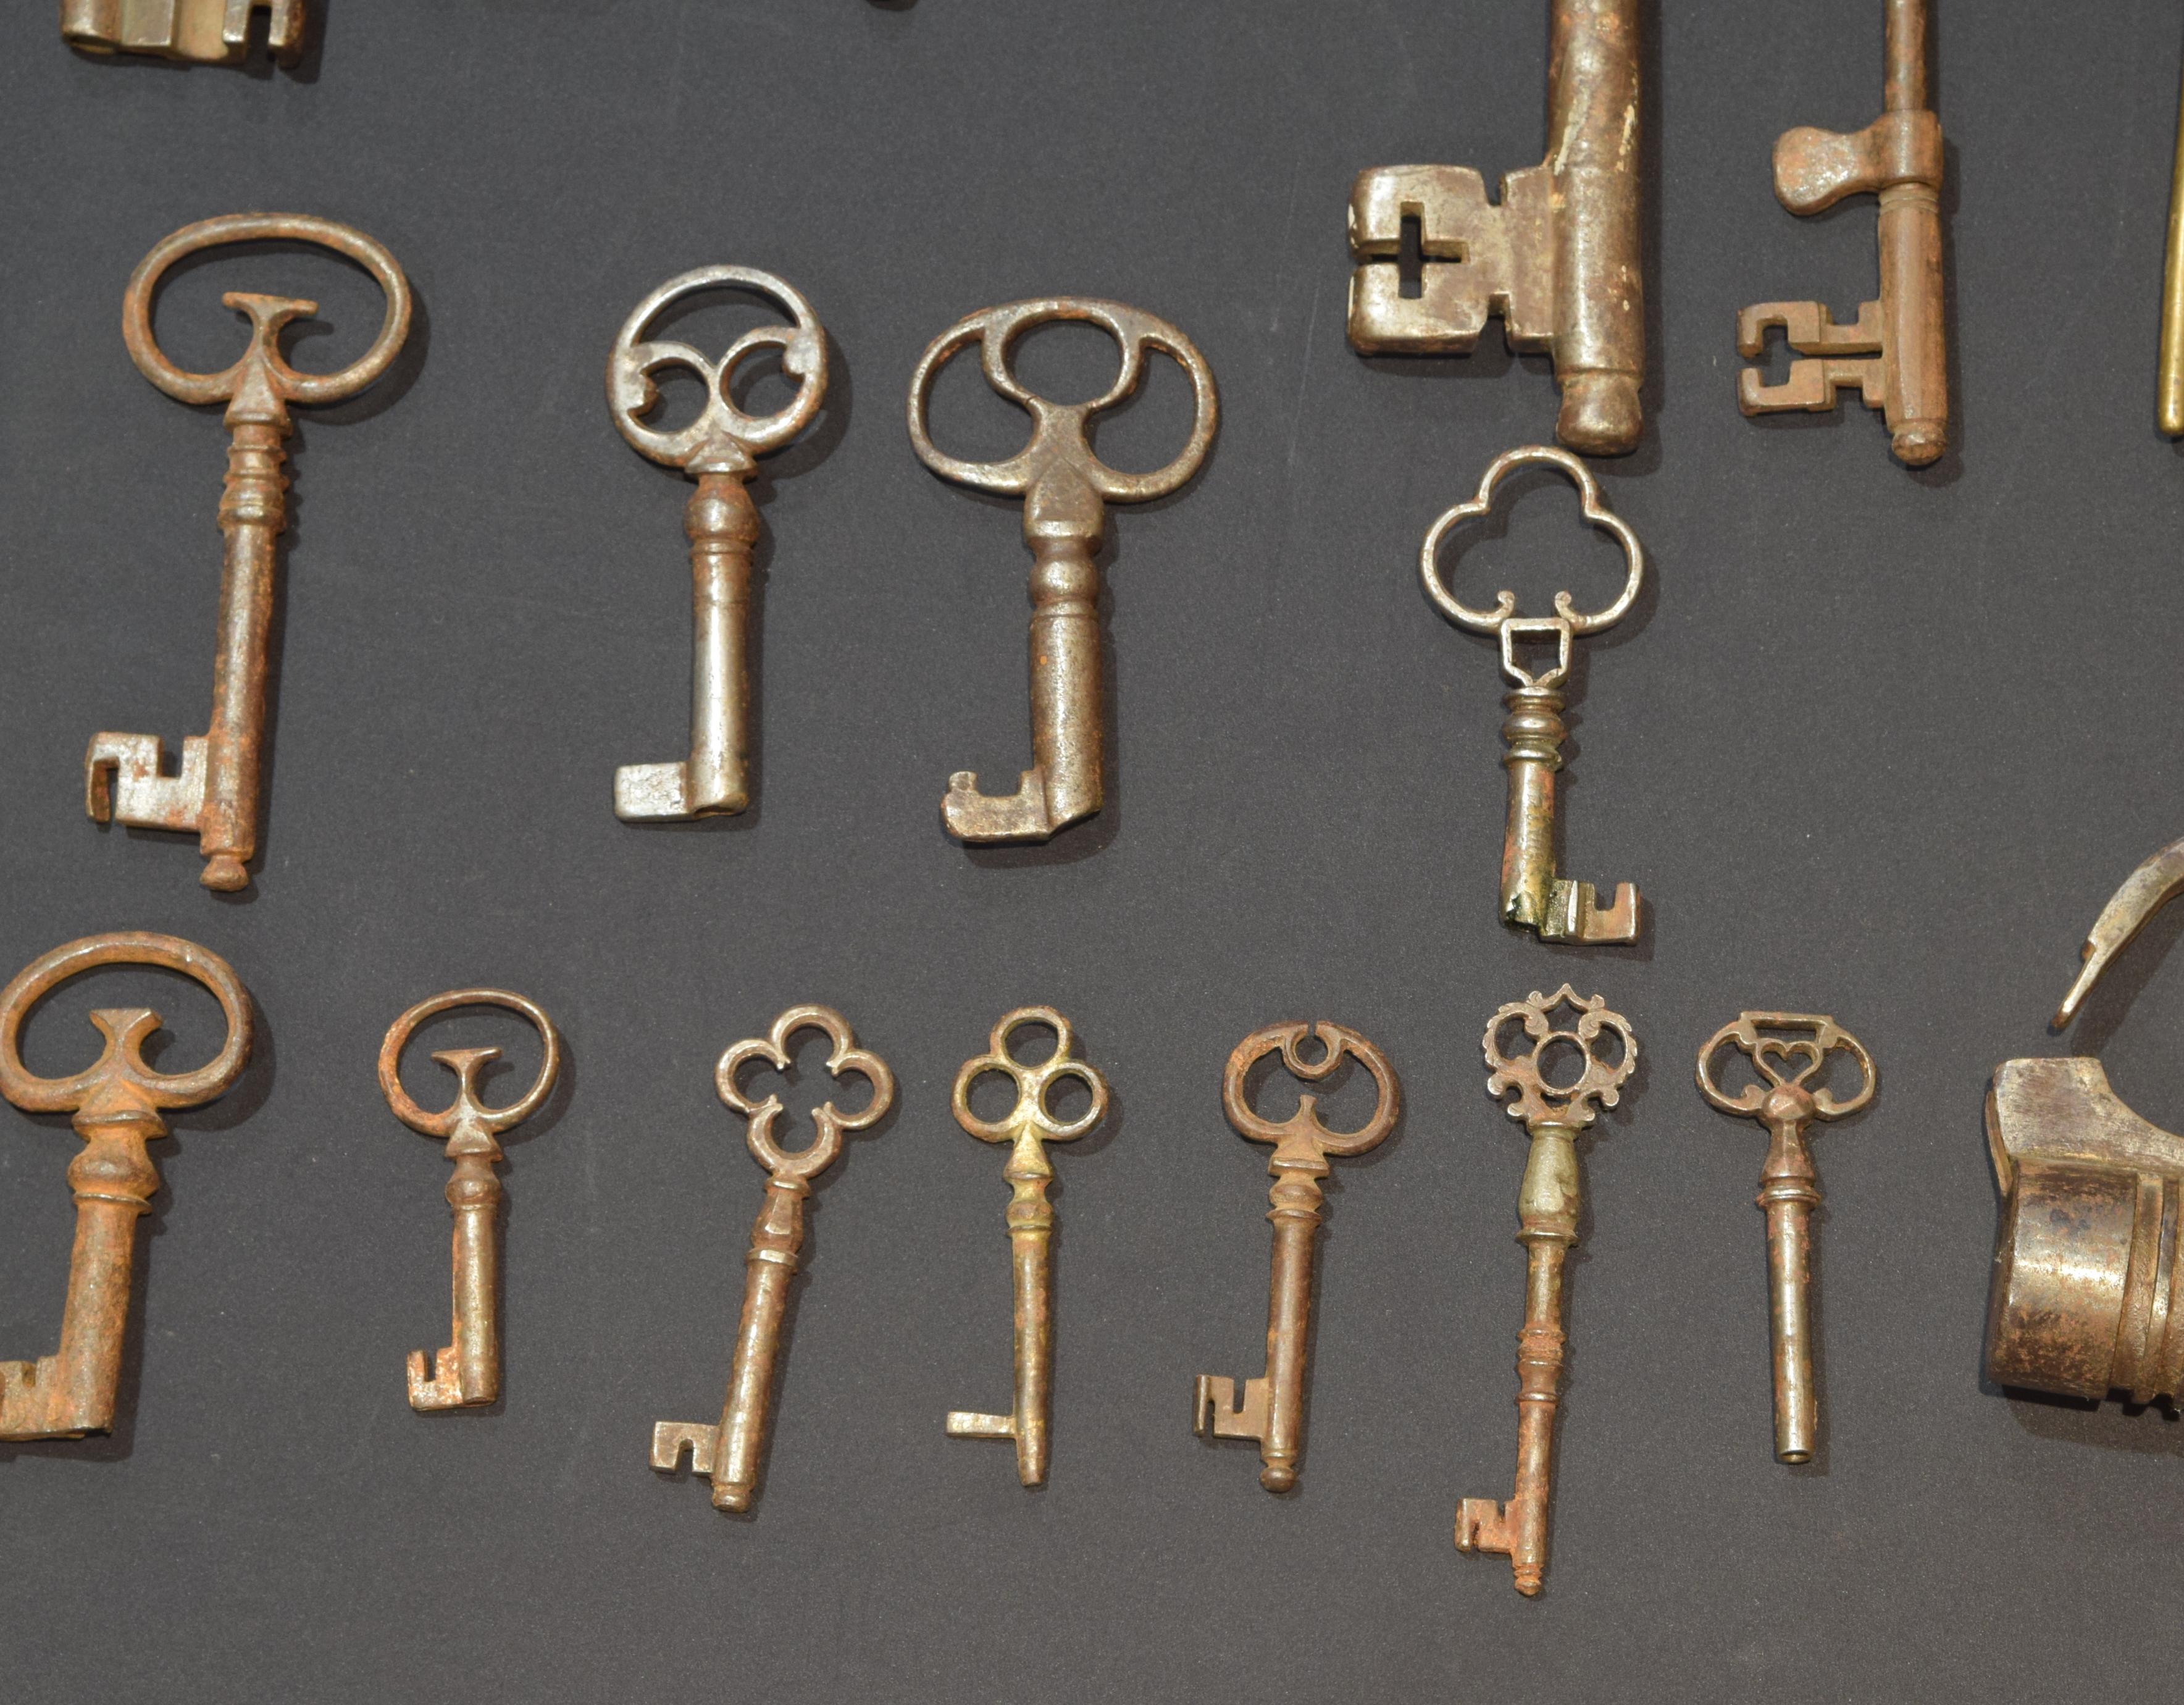 Other Keys, Iron Fitting and Lock Collection, Wrought Iron, 17th-19th Century For Sale